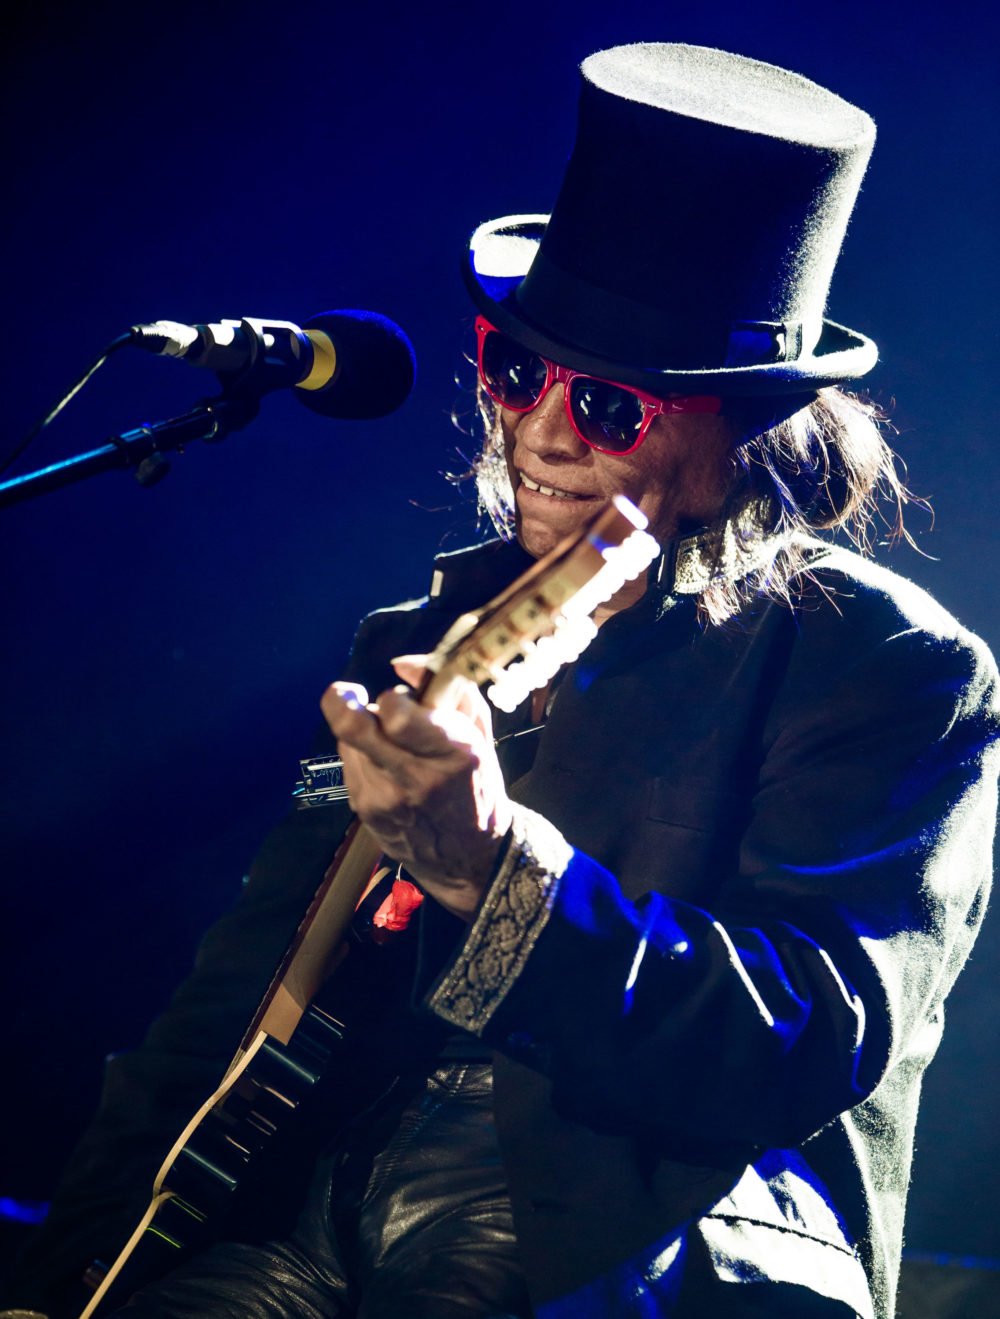 Rodriguez, the subject of the documentary “Searching for Sugar Man,” performs in Las Vegas in 2015